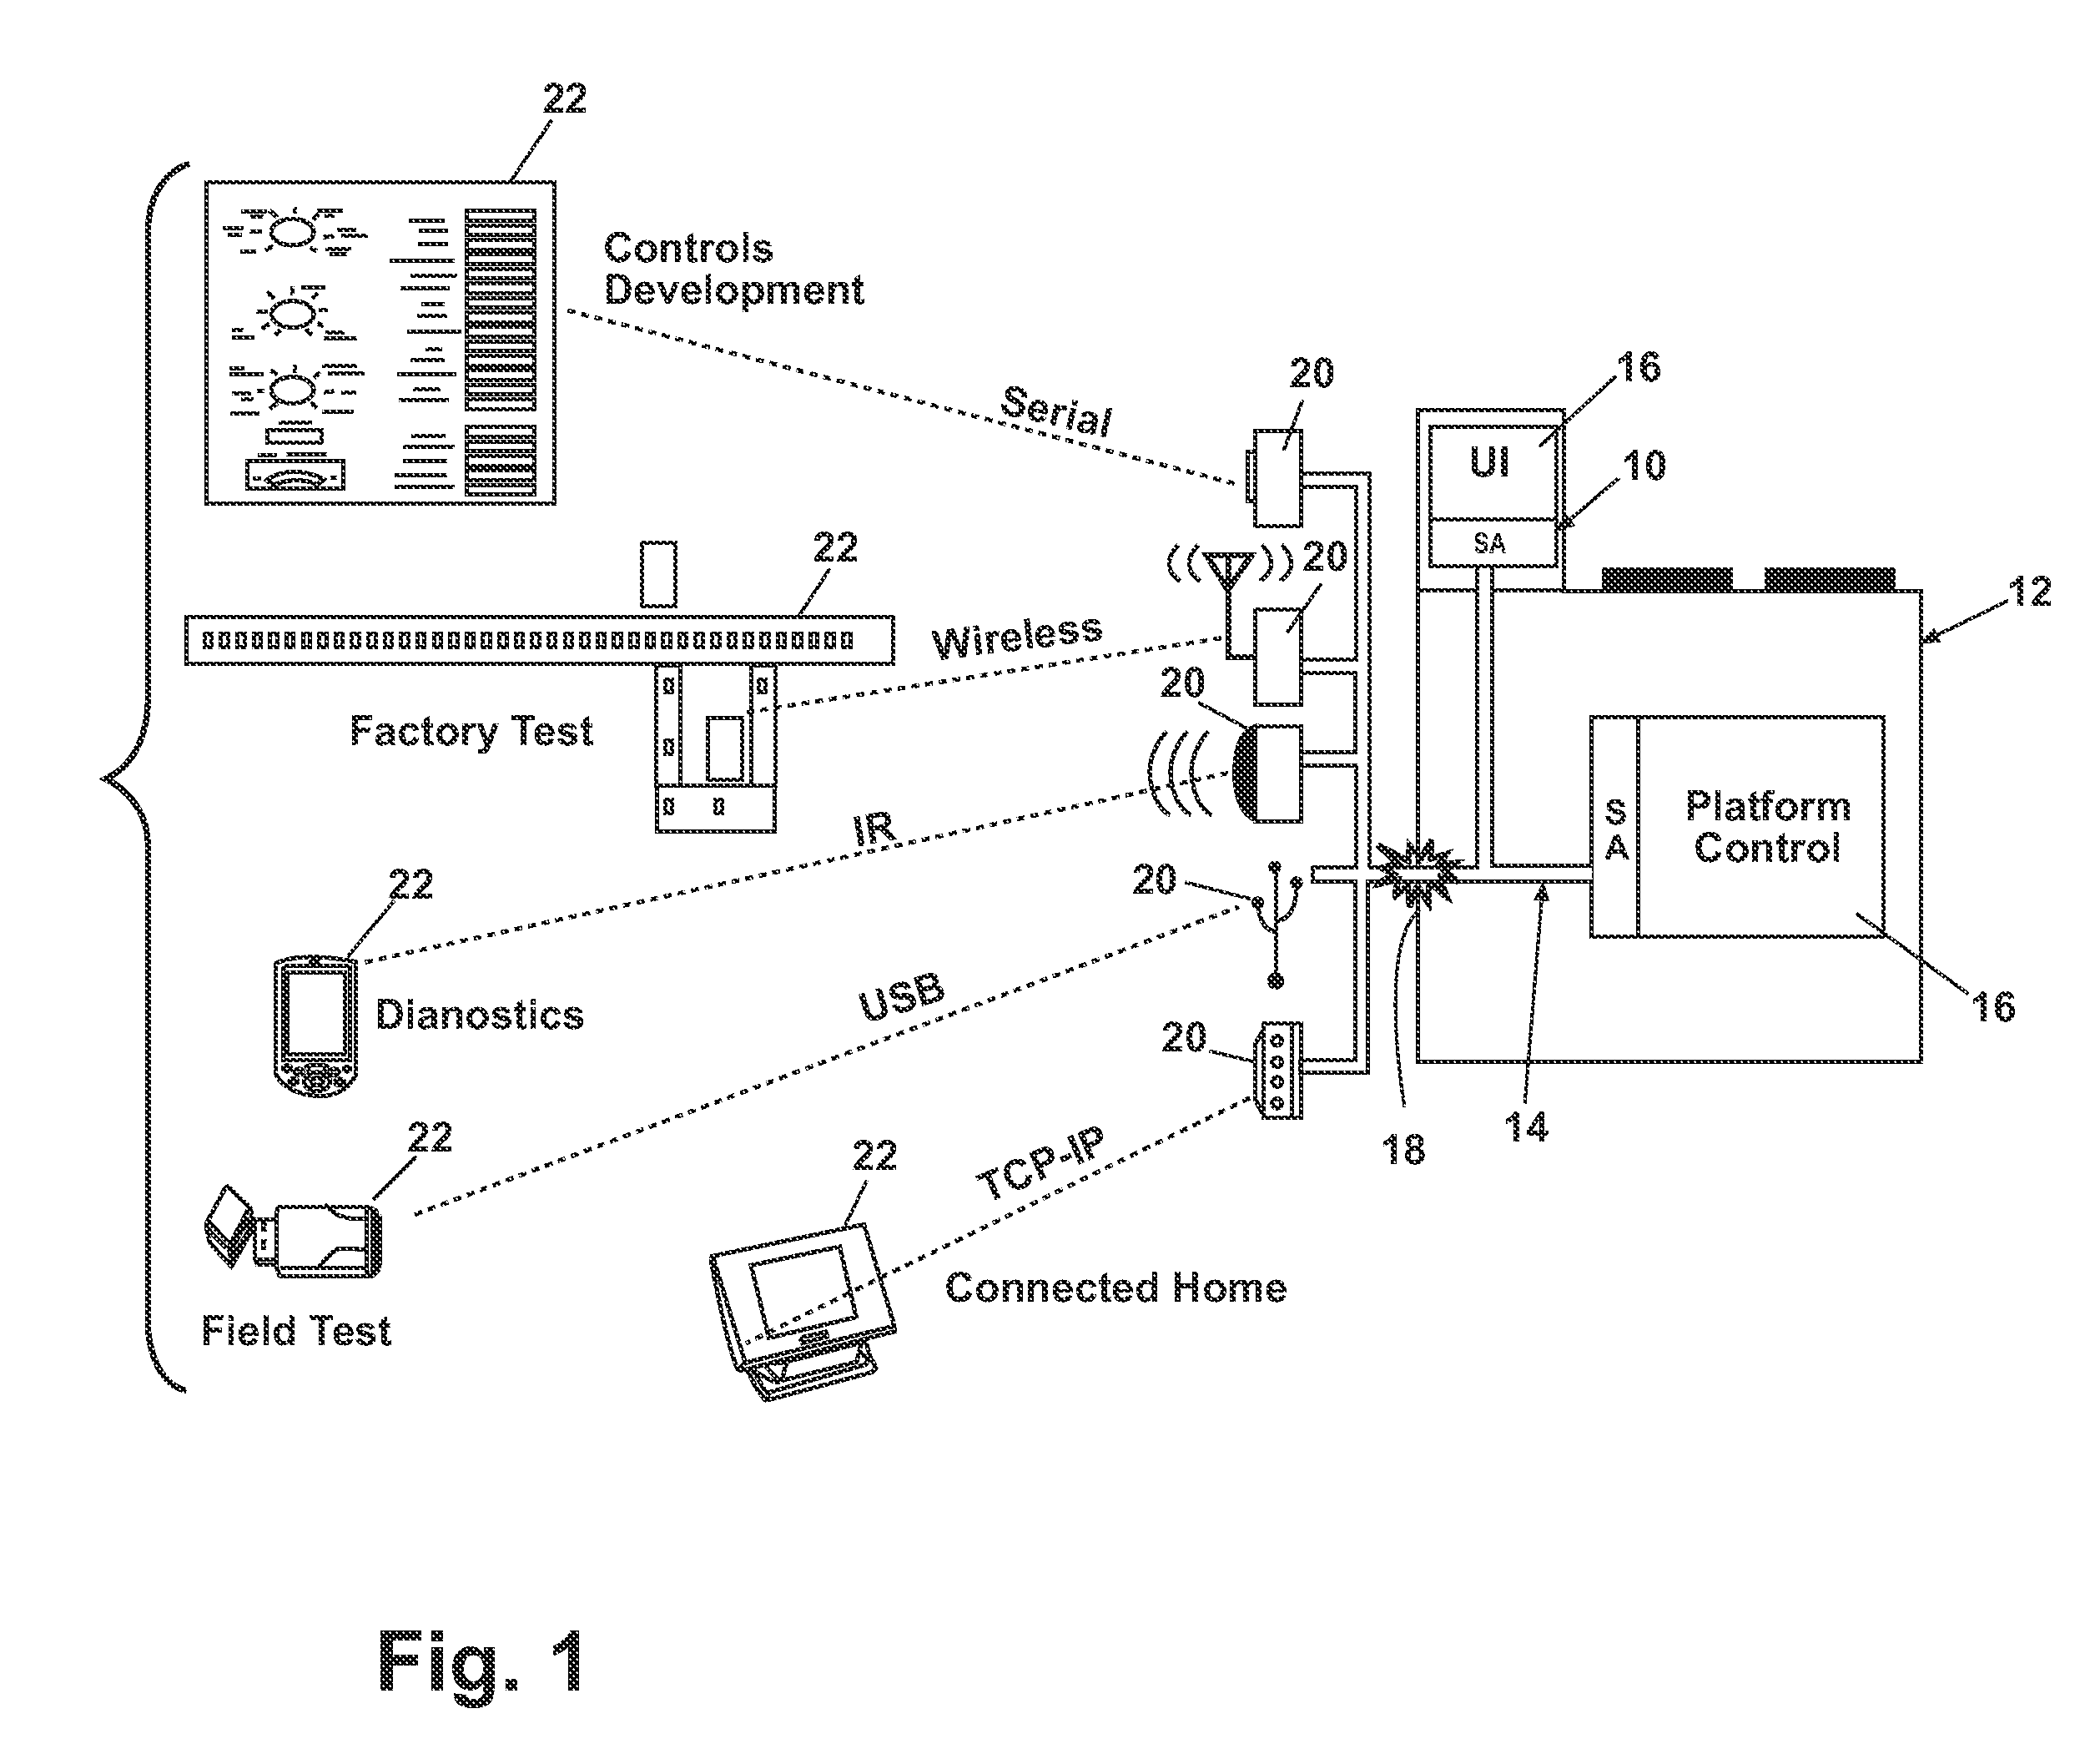 Data acquisition engine and system for an appliance